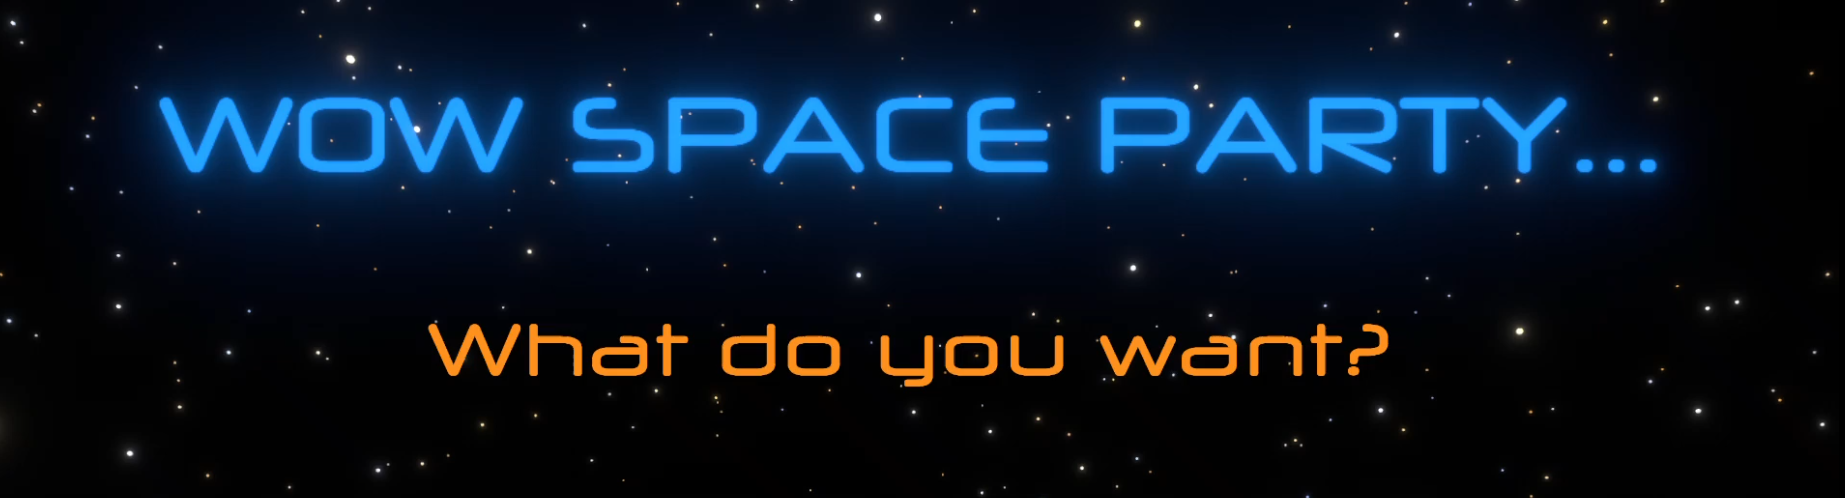 WOW SPACE PARTY...